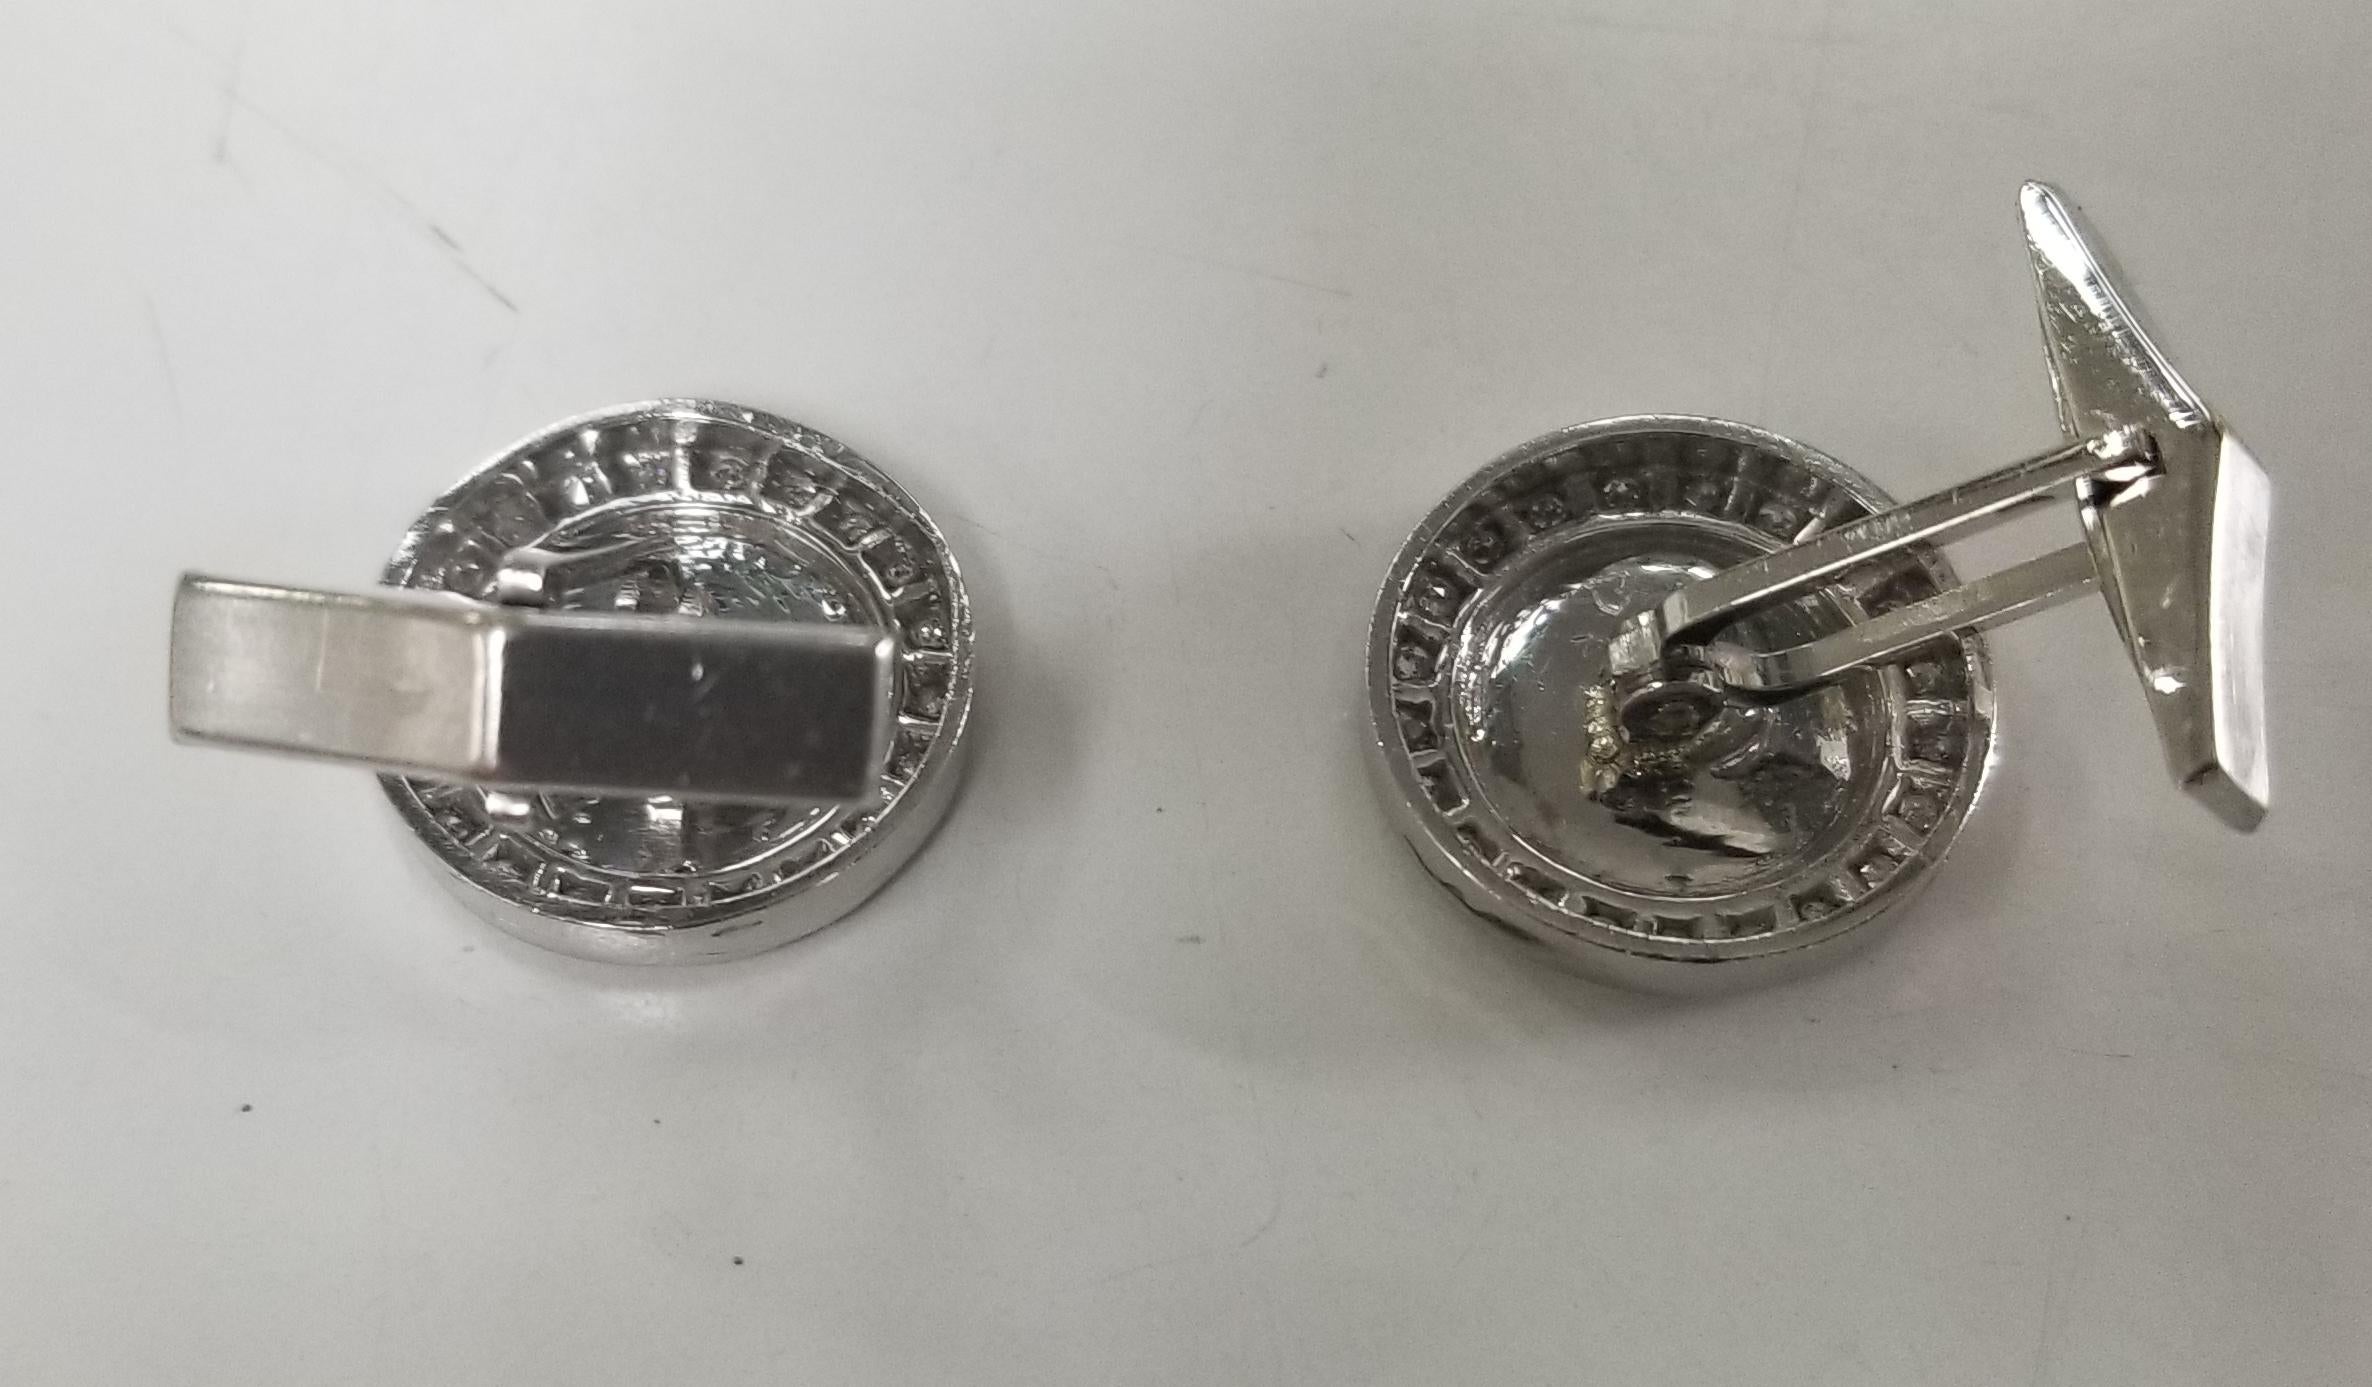 14 Karat White Gold 1.00 Carat Diamond Cufflinks with Brushed Finish In Excellent Condition For Sale In Los Angeles, CA